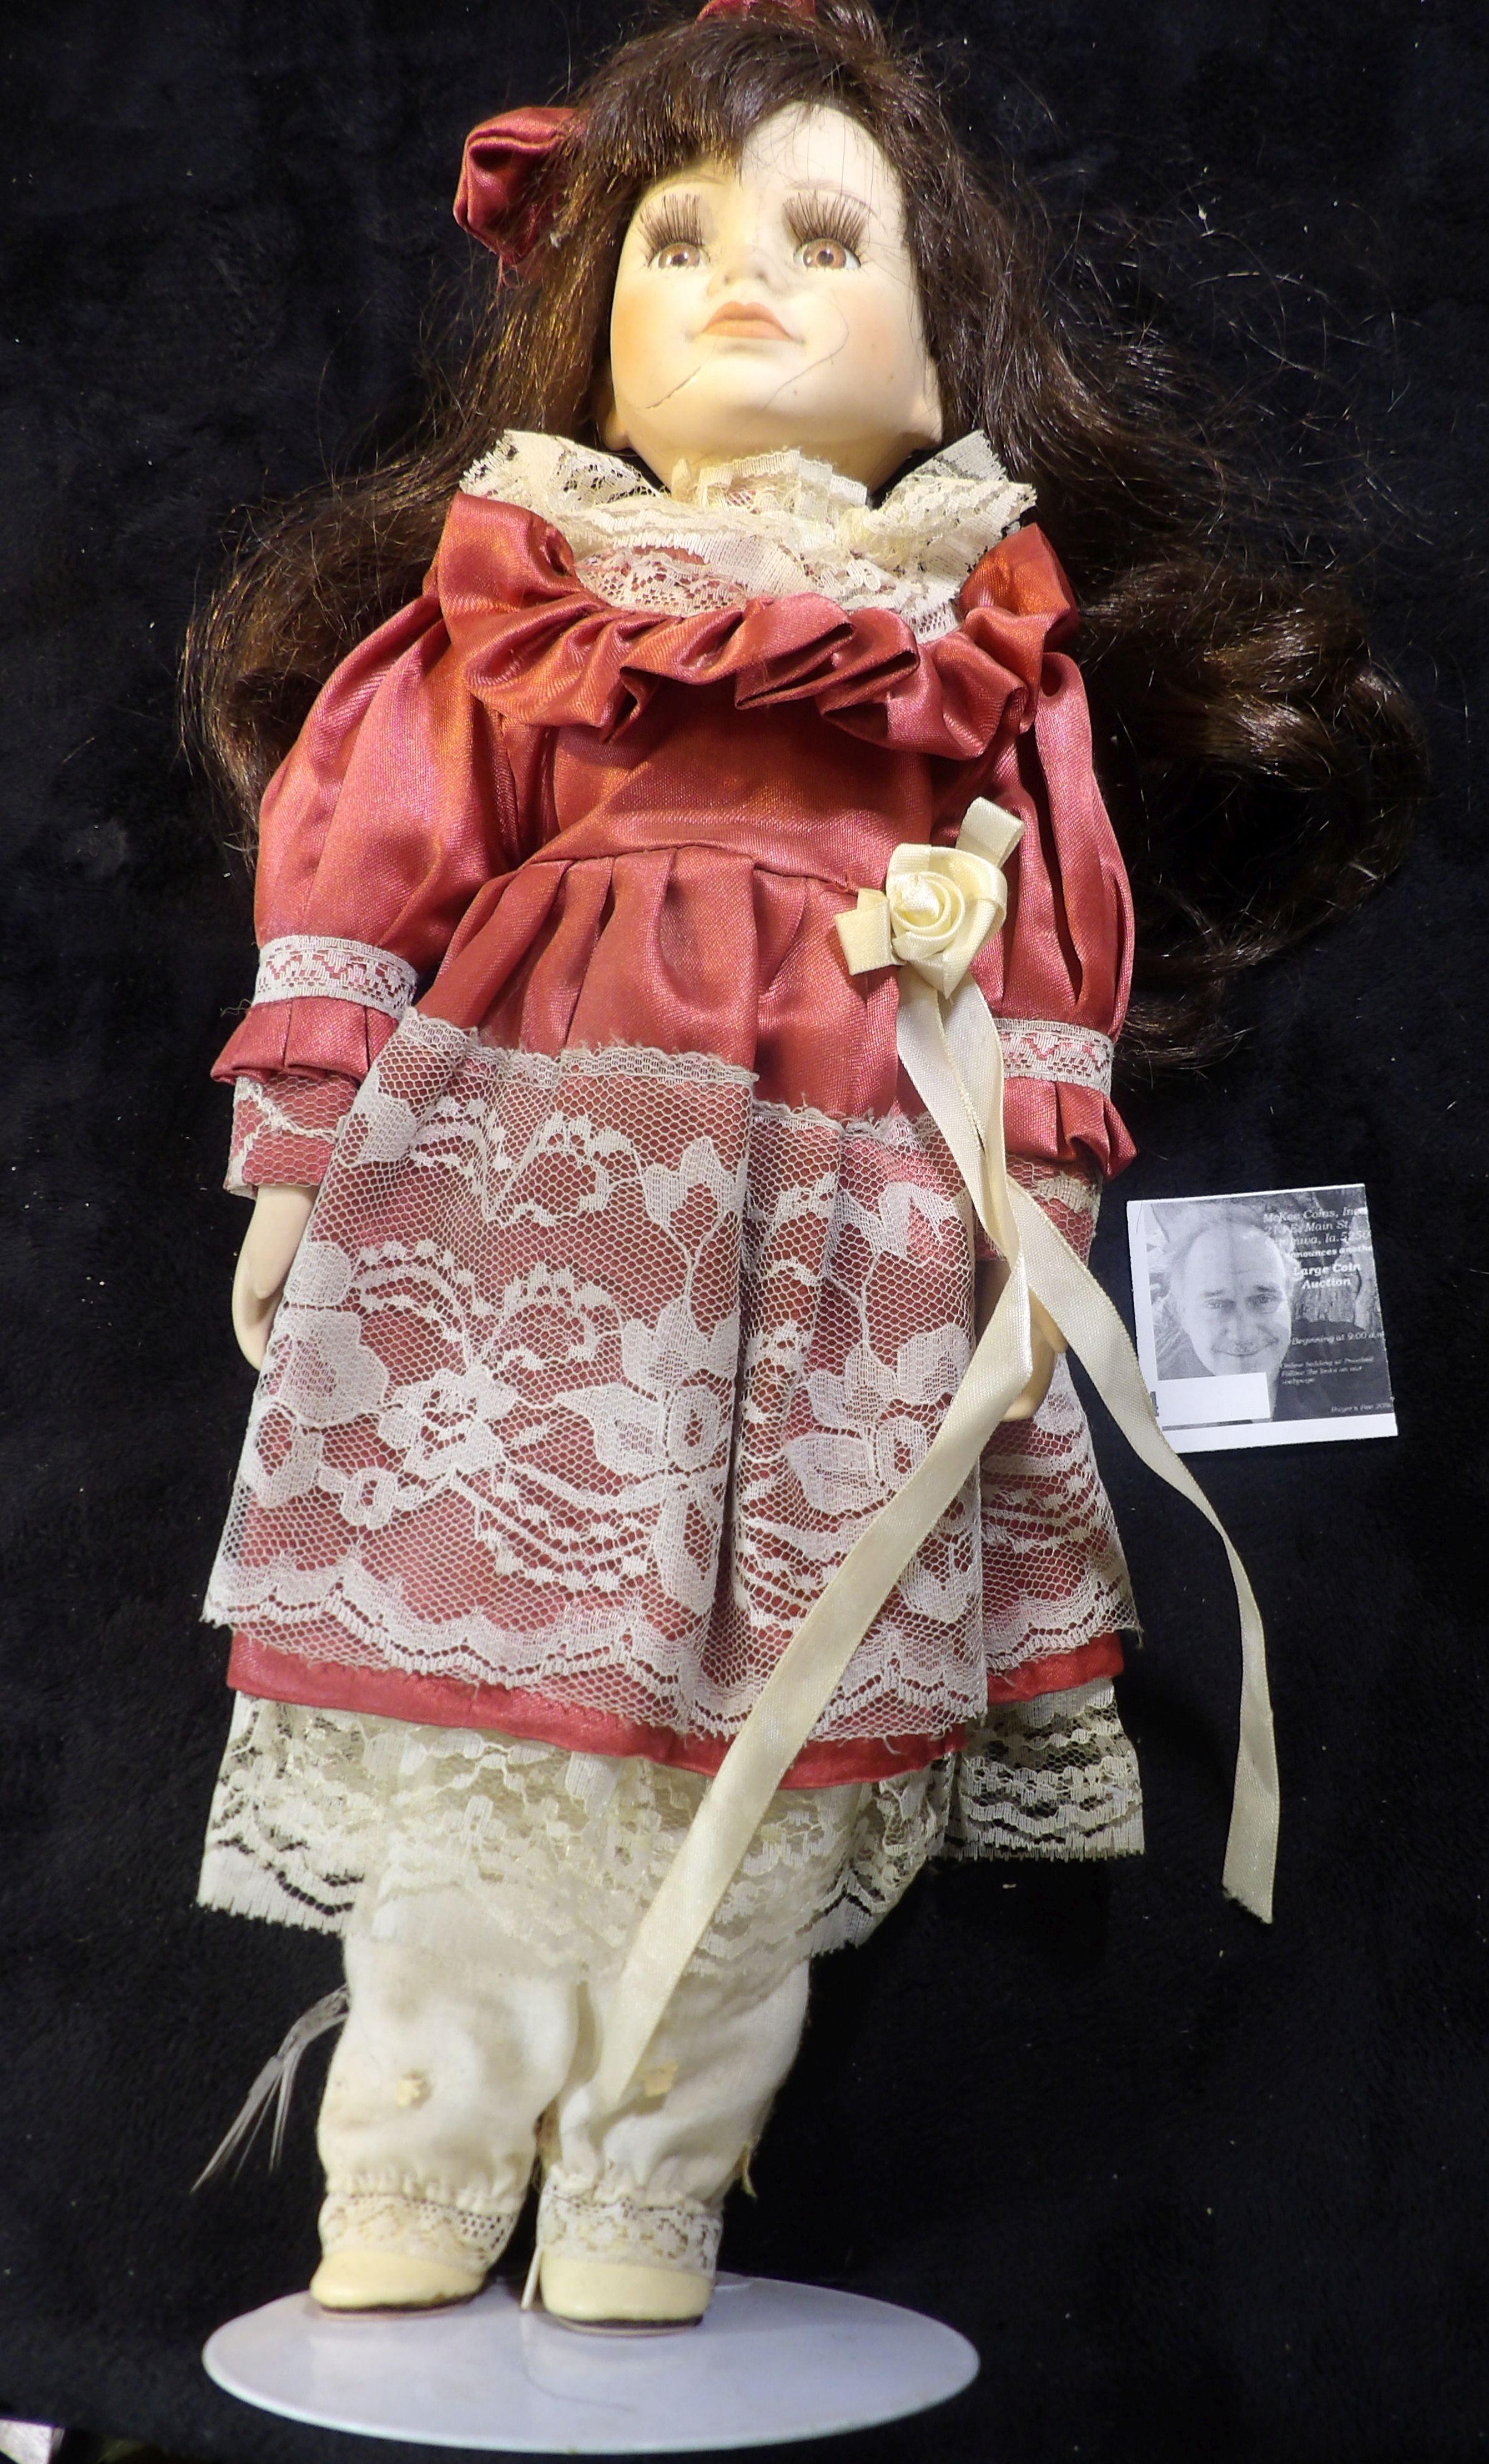 Female Doll on stand in a lace costume with bow in her hair. 15" tall.